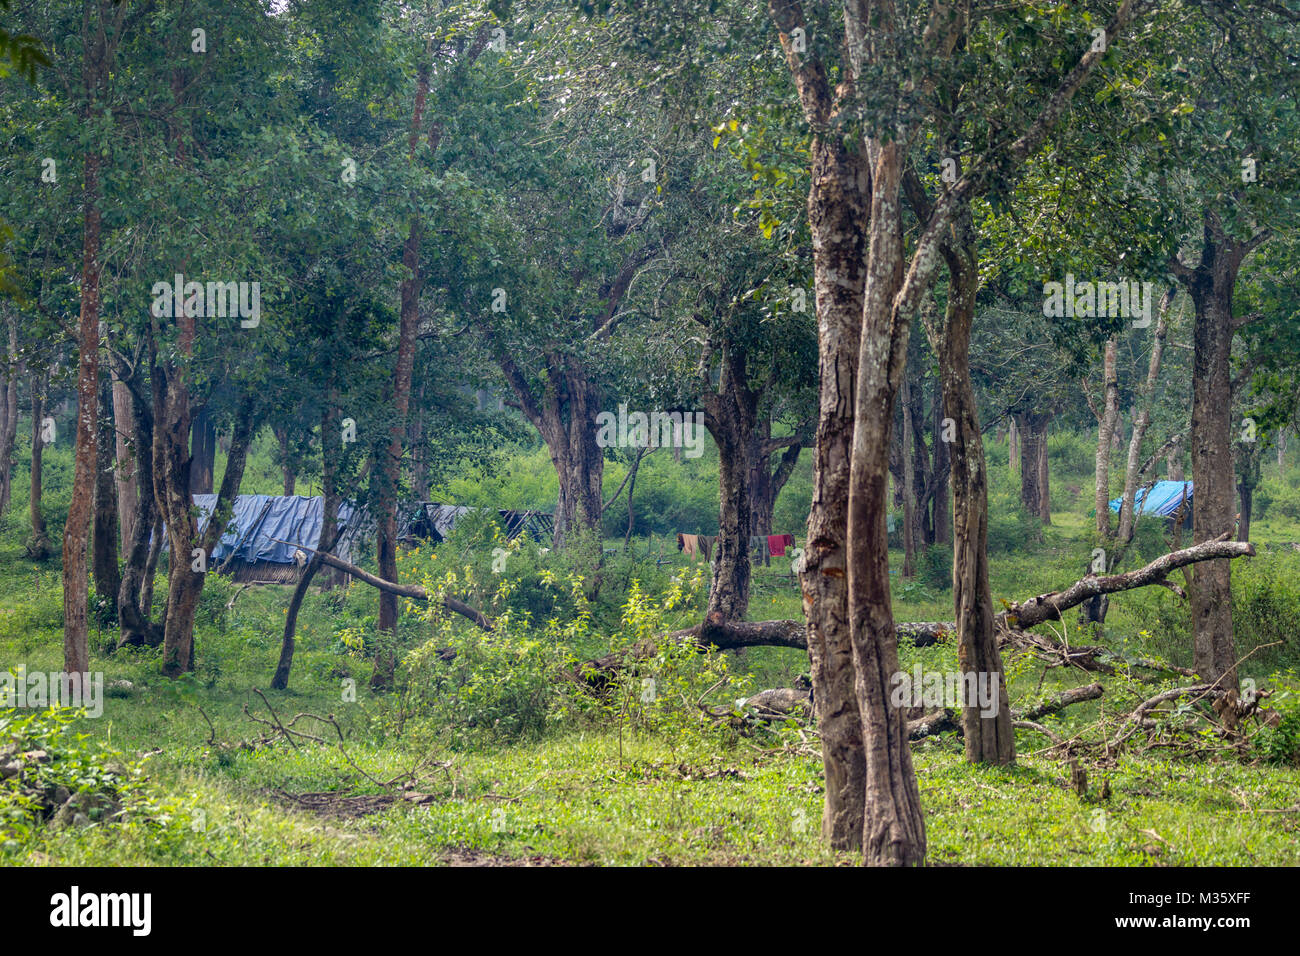 Coorg, India - October 29, 2013: Dubare Elephant Camp. Tribal dwellings hidden in jungle are bamboo-clay huts with blue tarps as roof. Green setting,  Stock Photo